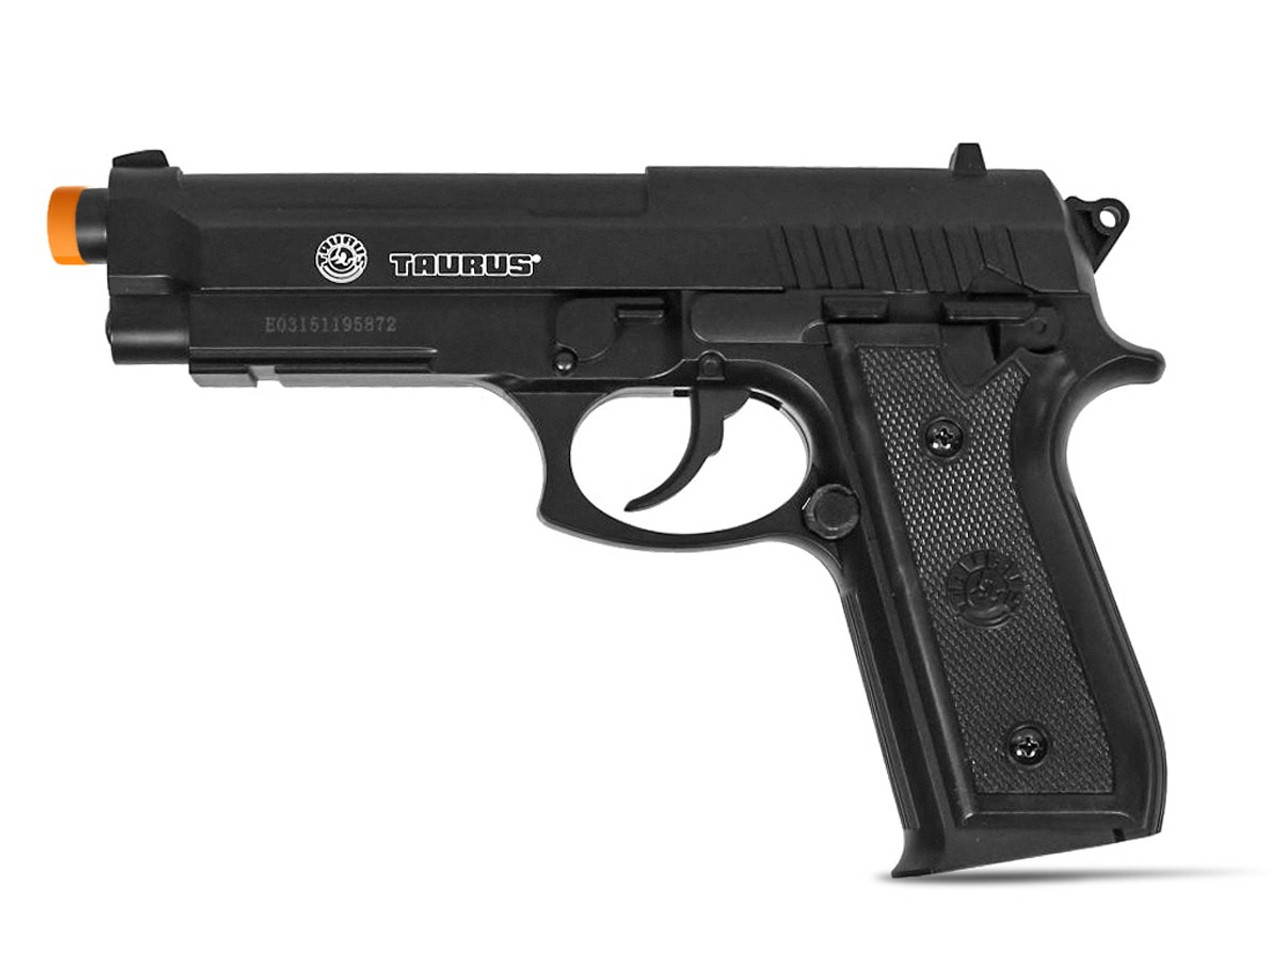 USA SELLER FAST SHIPPING TAURUS PT92 377 FPS CO2 GAS Non-Blowback M9 Airsoft  Pistol Replica w/ BBs SET